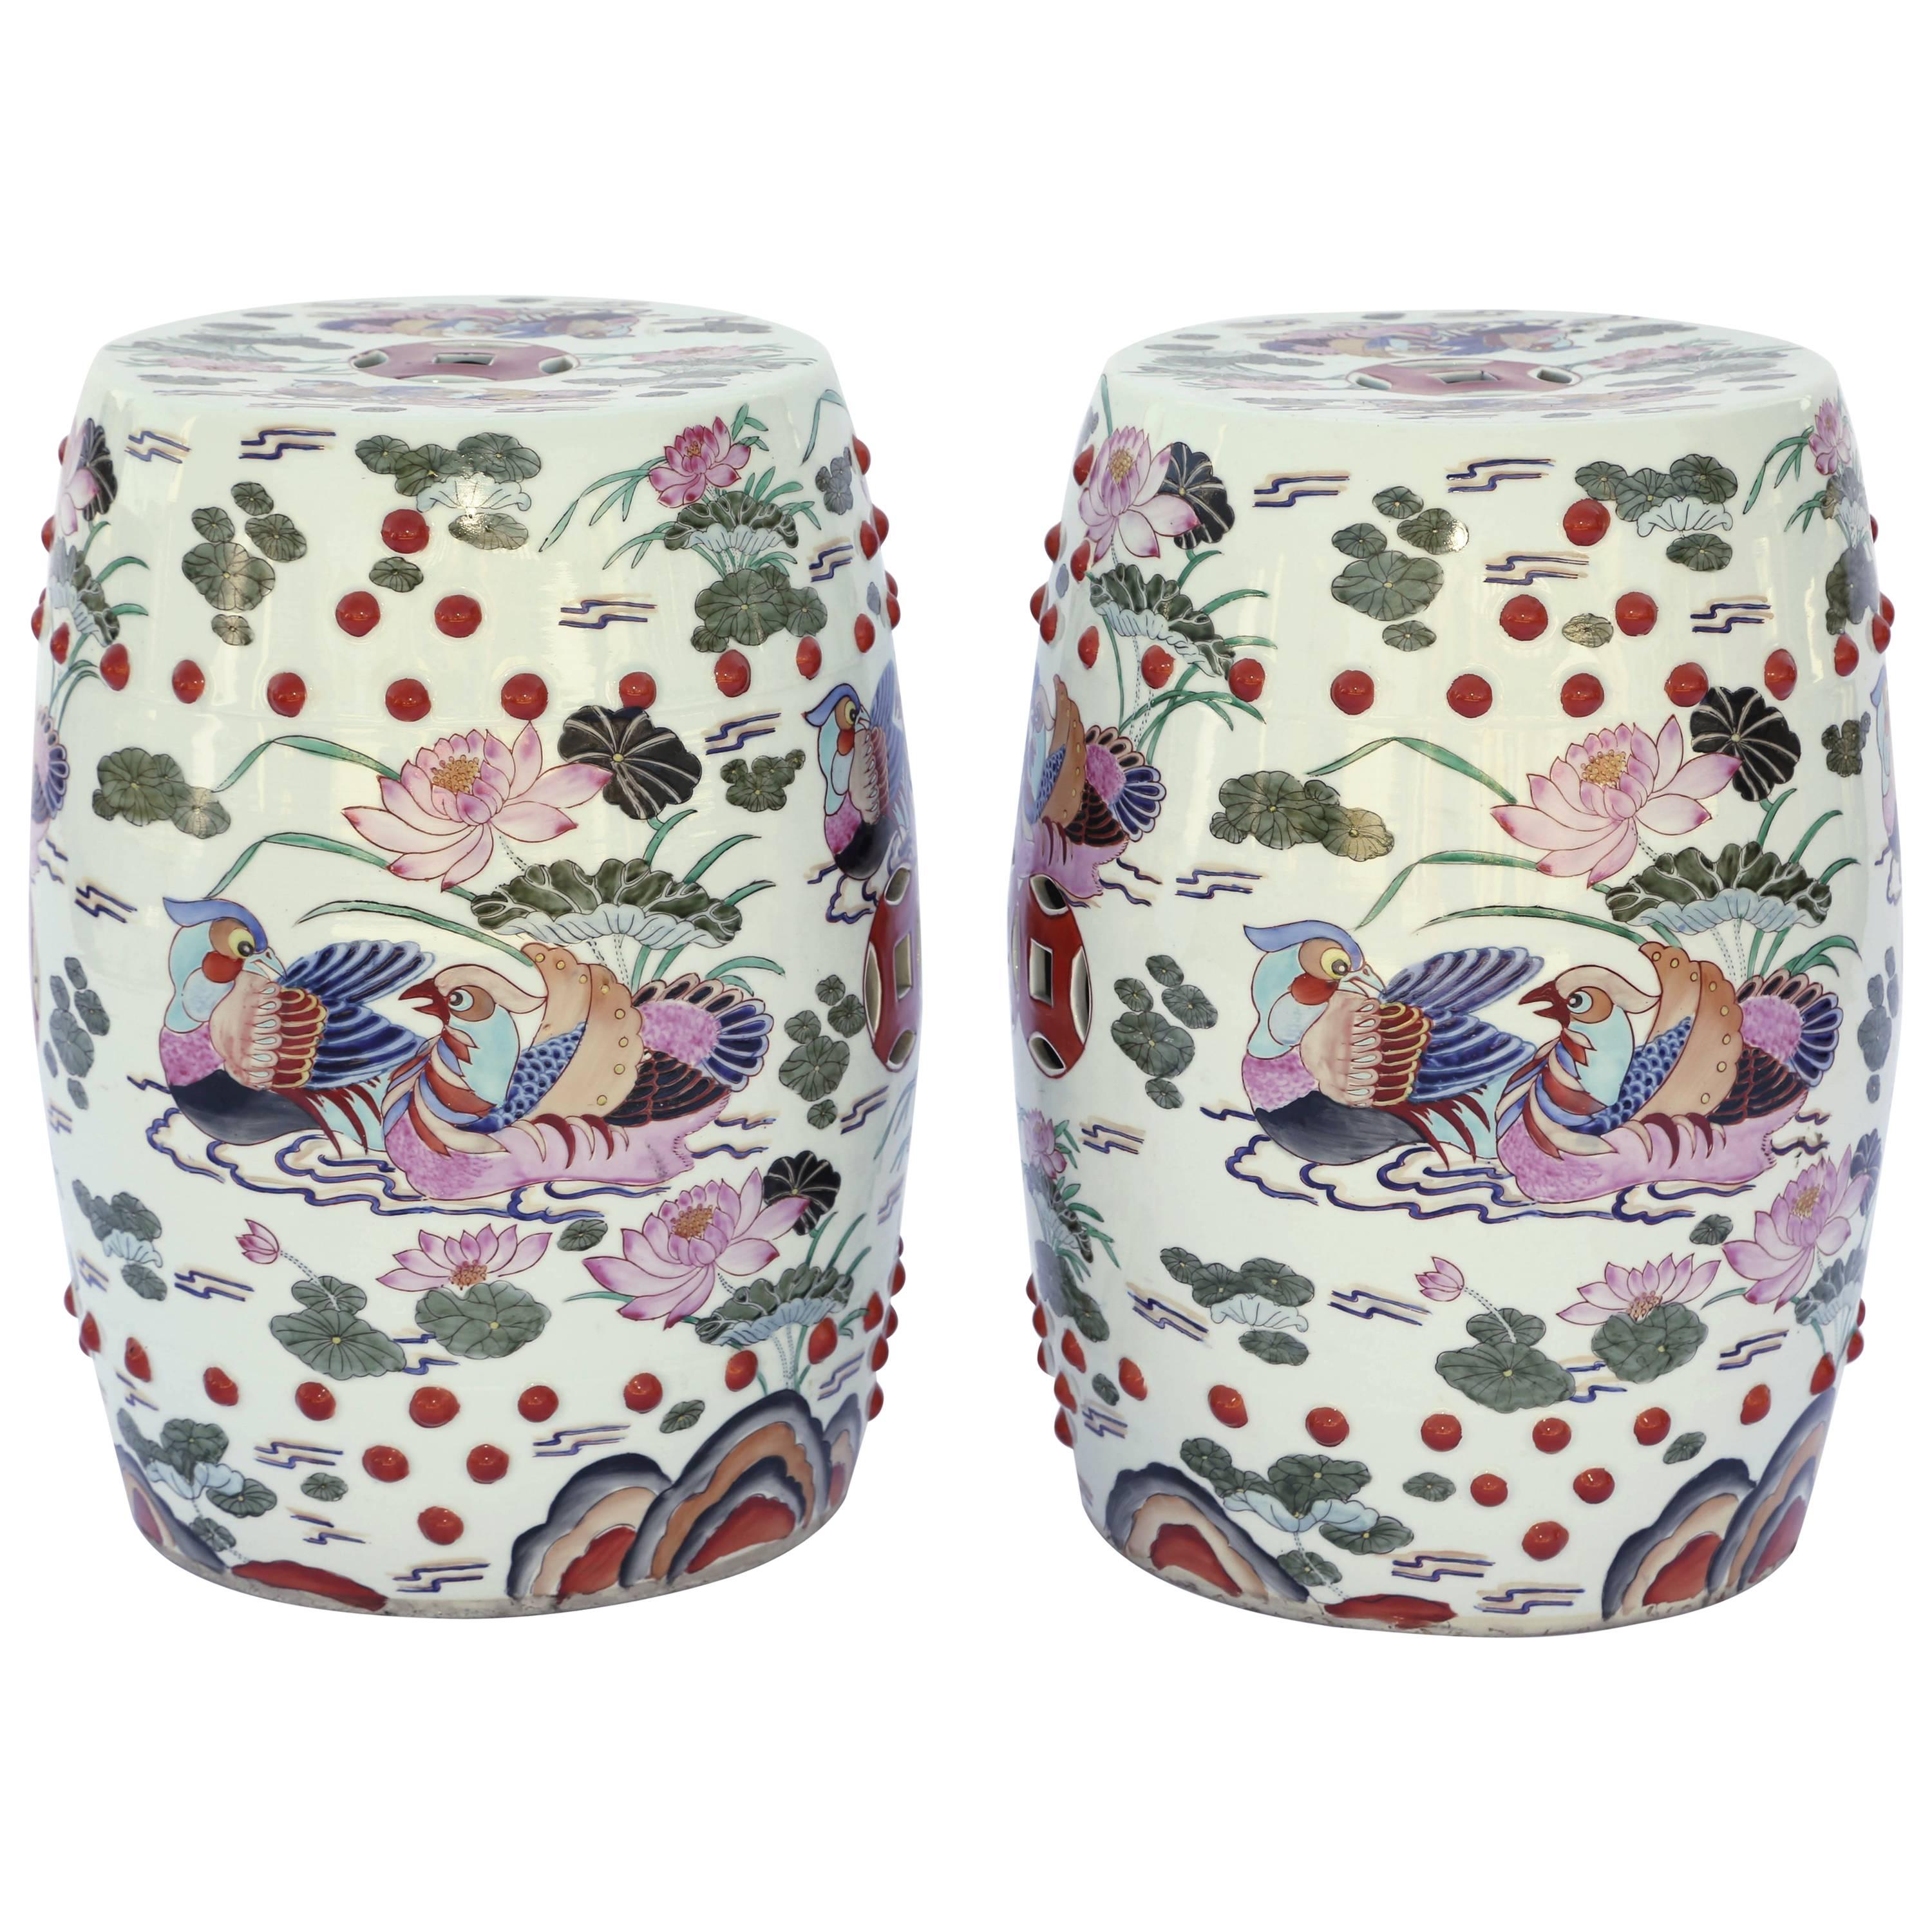 Pair of Hand-Painted Chinese Porcelain Drum Stools